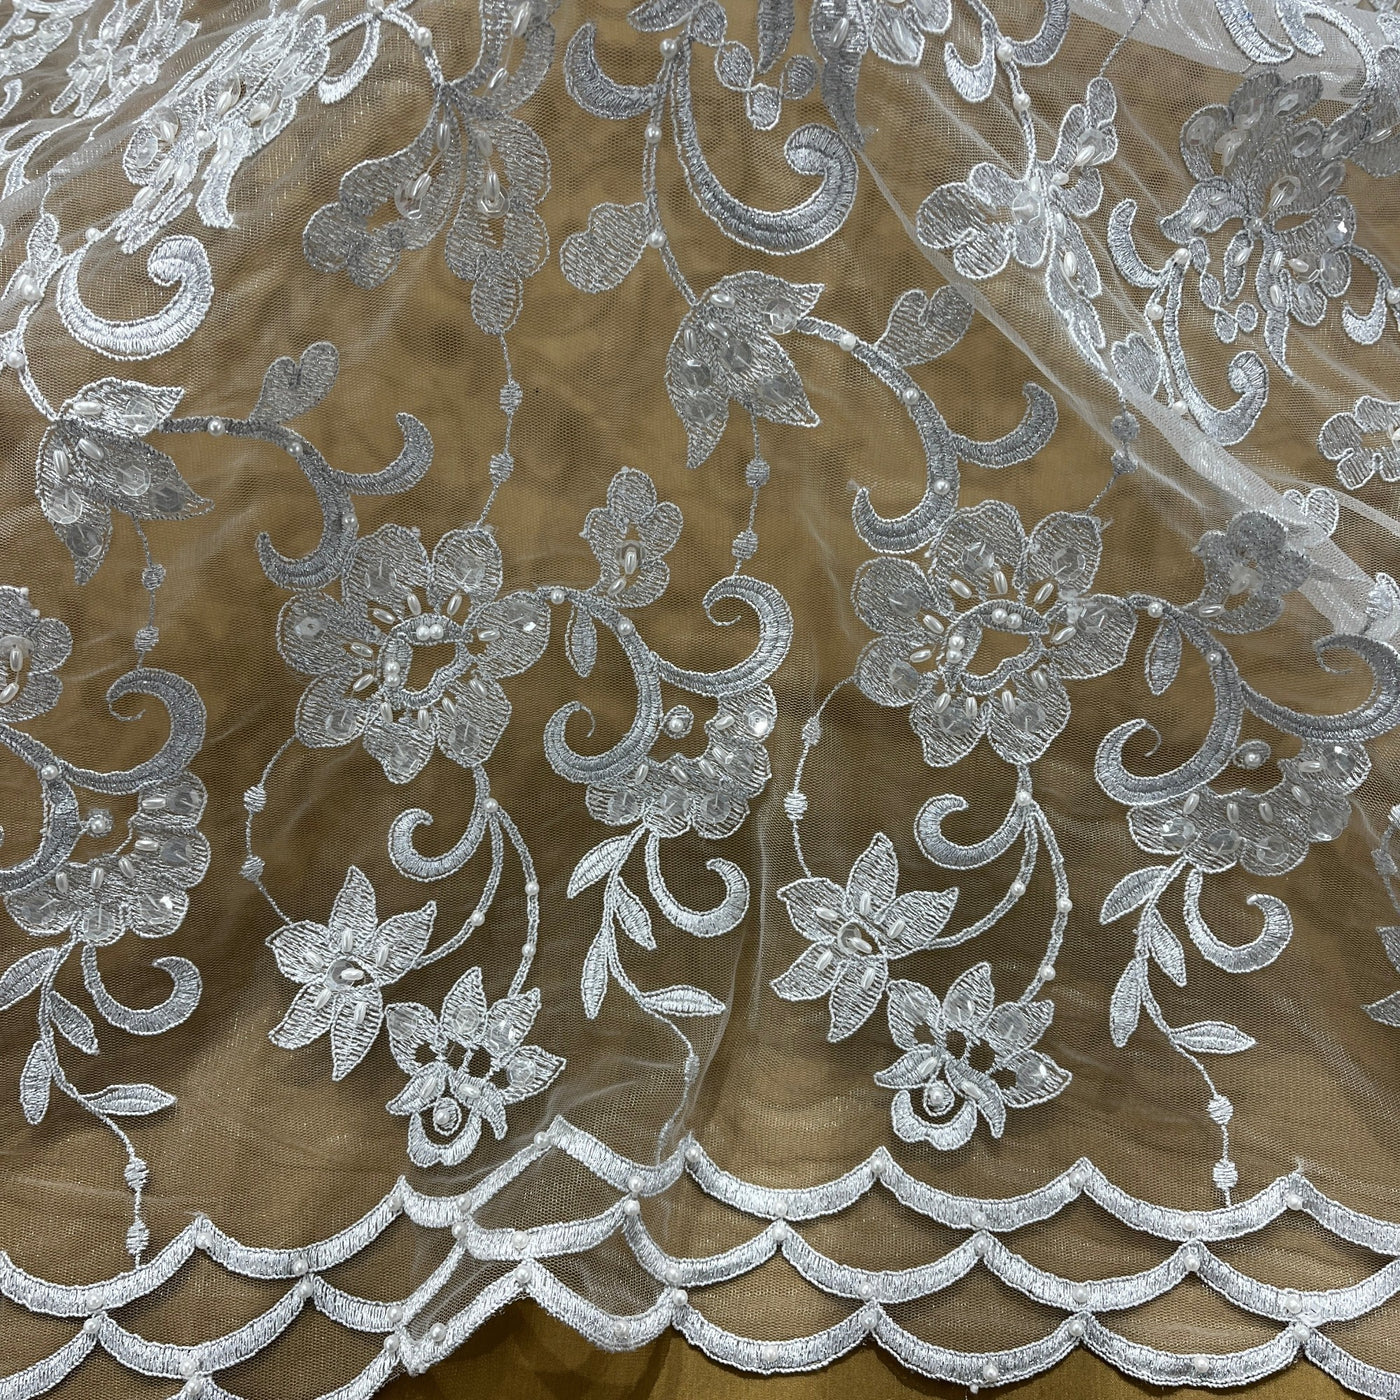 Beaded & Corded Bridal Fabric Lace Embroidered on 100% Polyester Net Mesh | Lace USA - 96297W-BP Silver